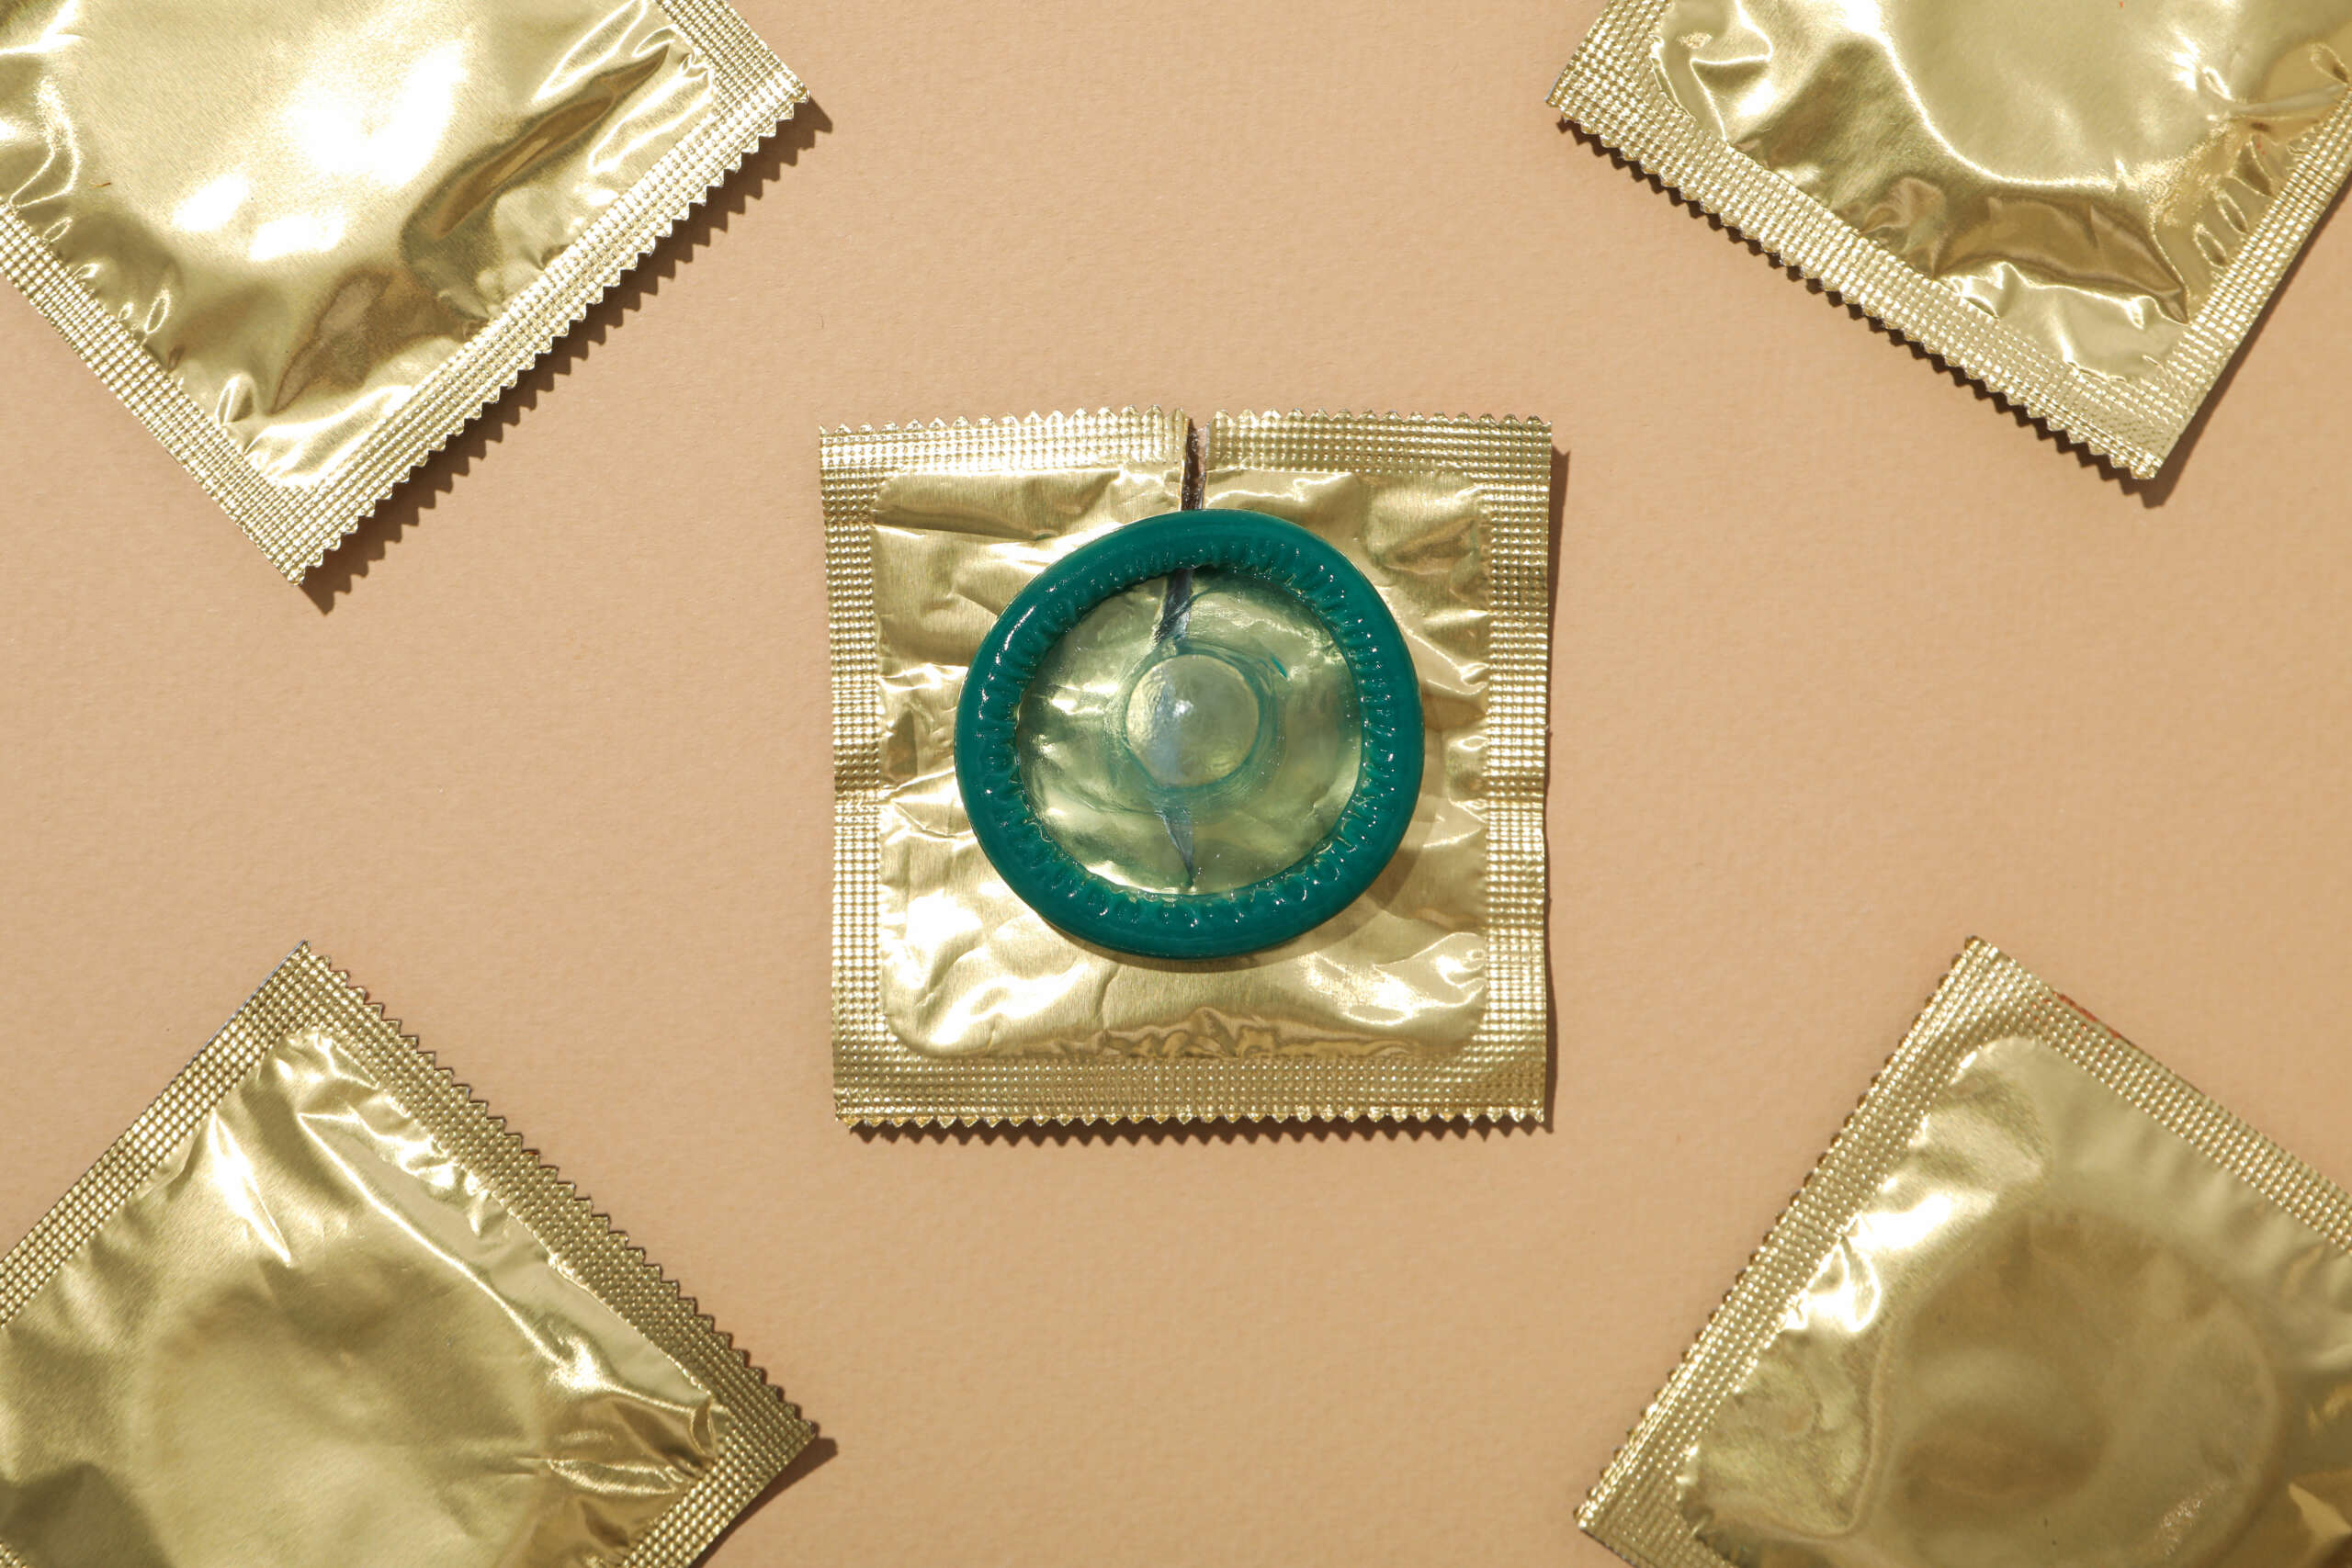 Condoms in a golden wrapper on a light background close-up